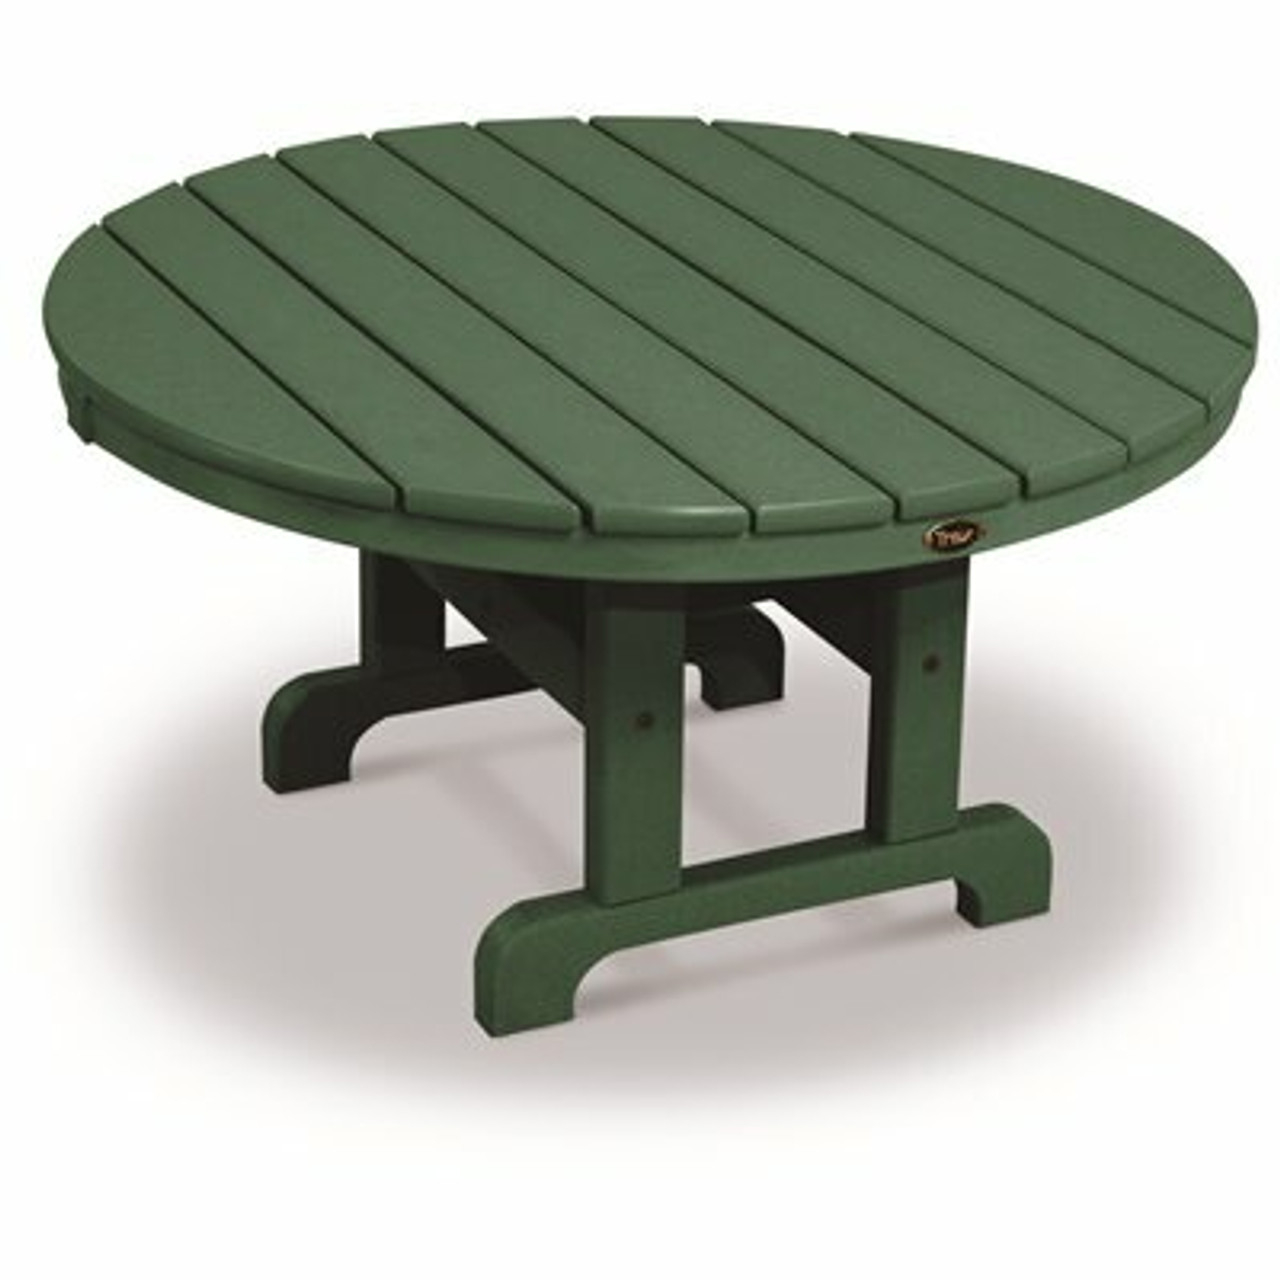 Trex Outdoor Furniture Cape Cod 36 In. Rainforest Canopy Round Plastic Outdoor Patio Coffee Table